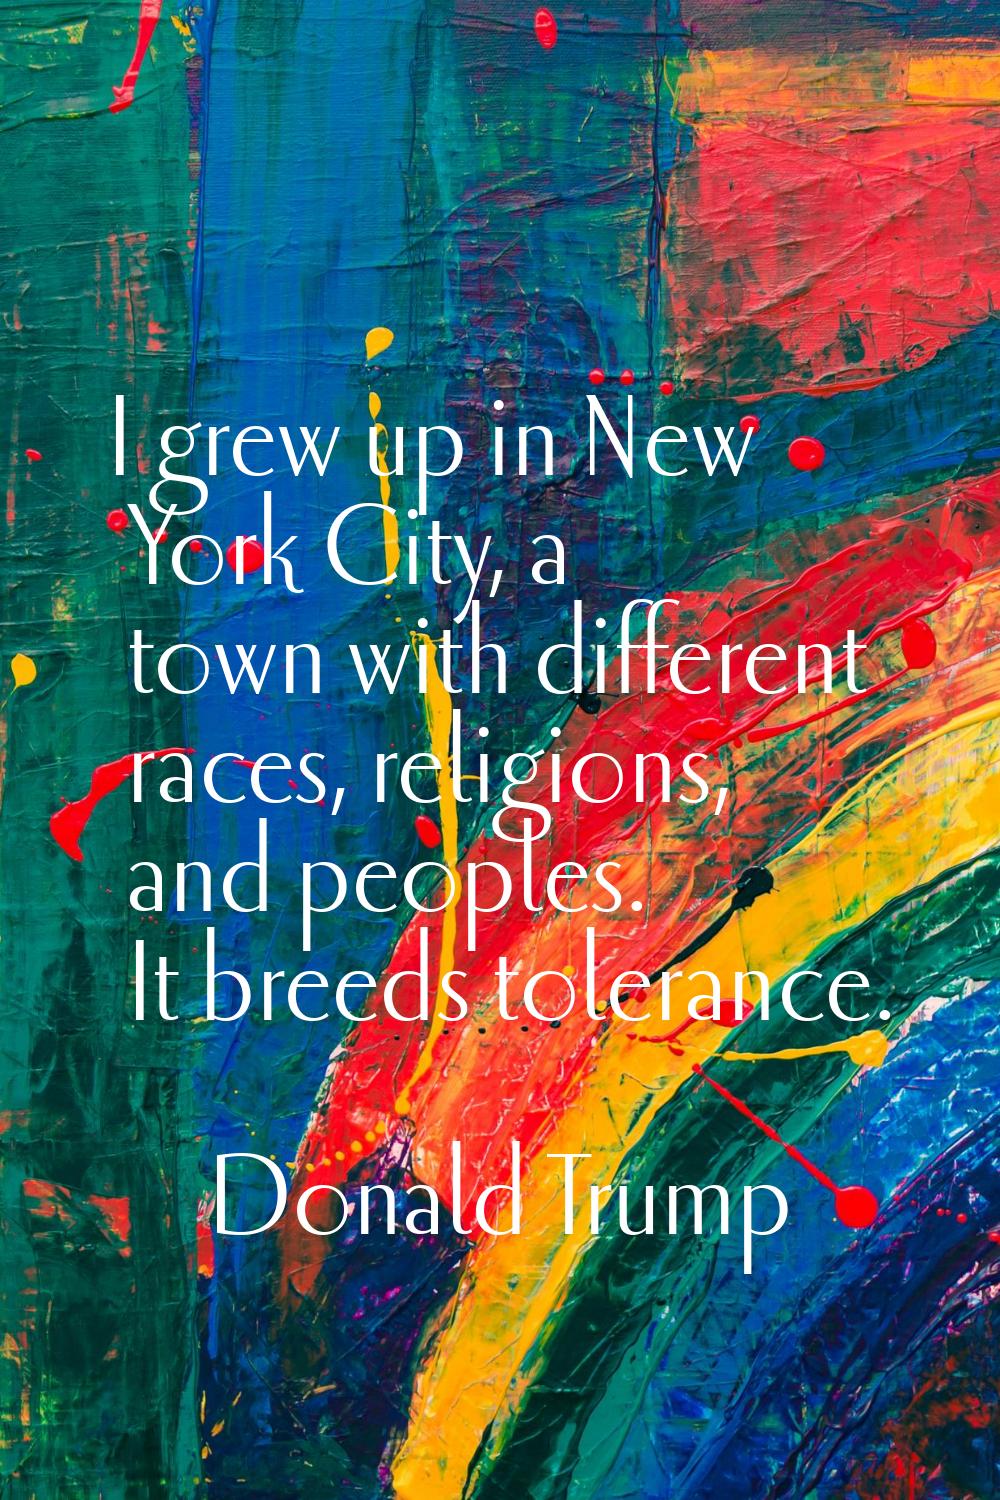 I grew up in New York City, a town with different races, religions, and peoples. It breeds toleranc